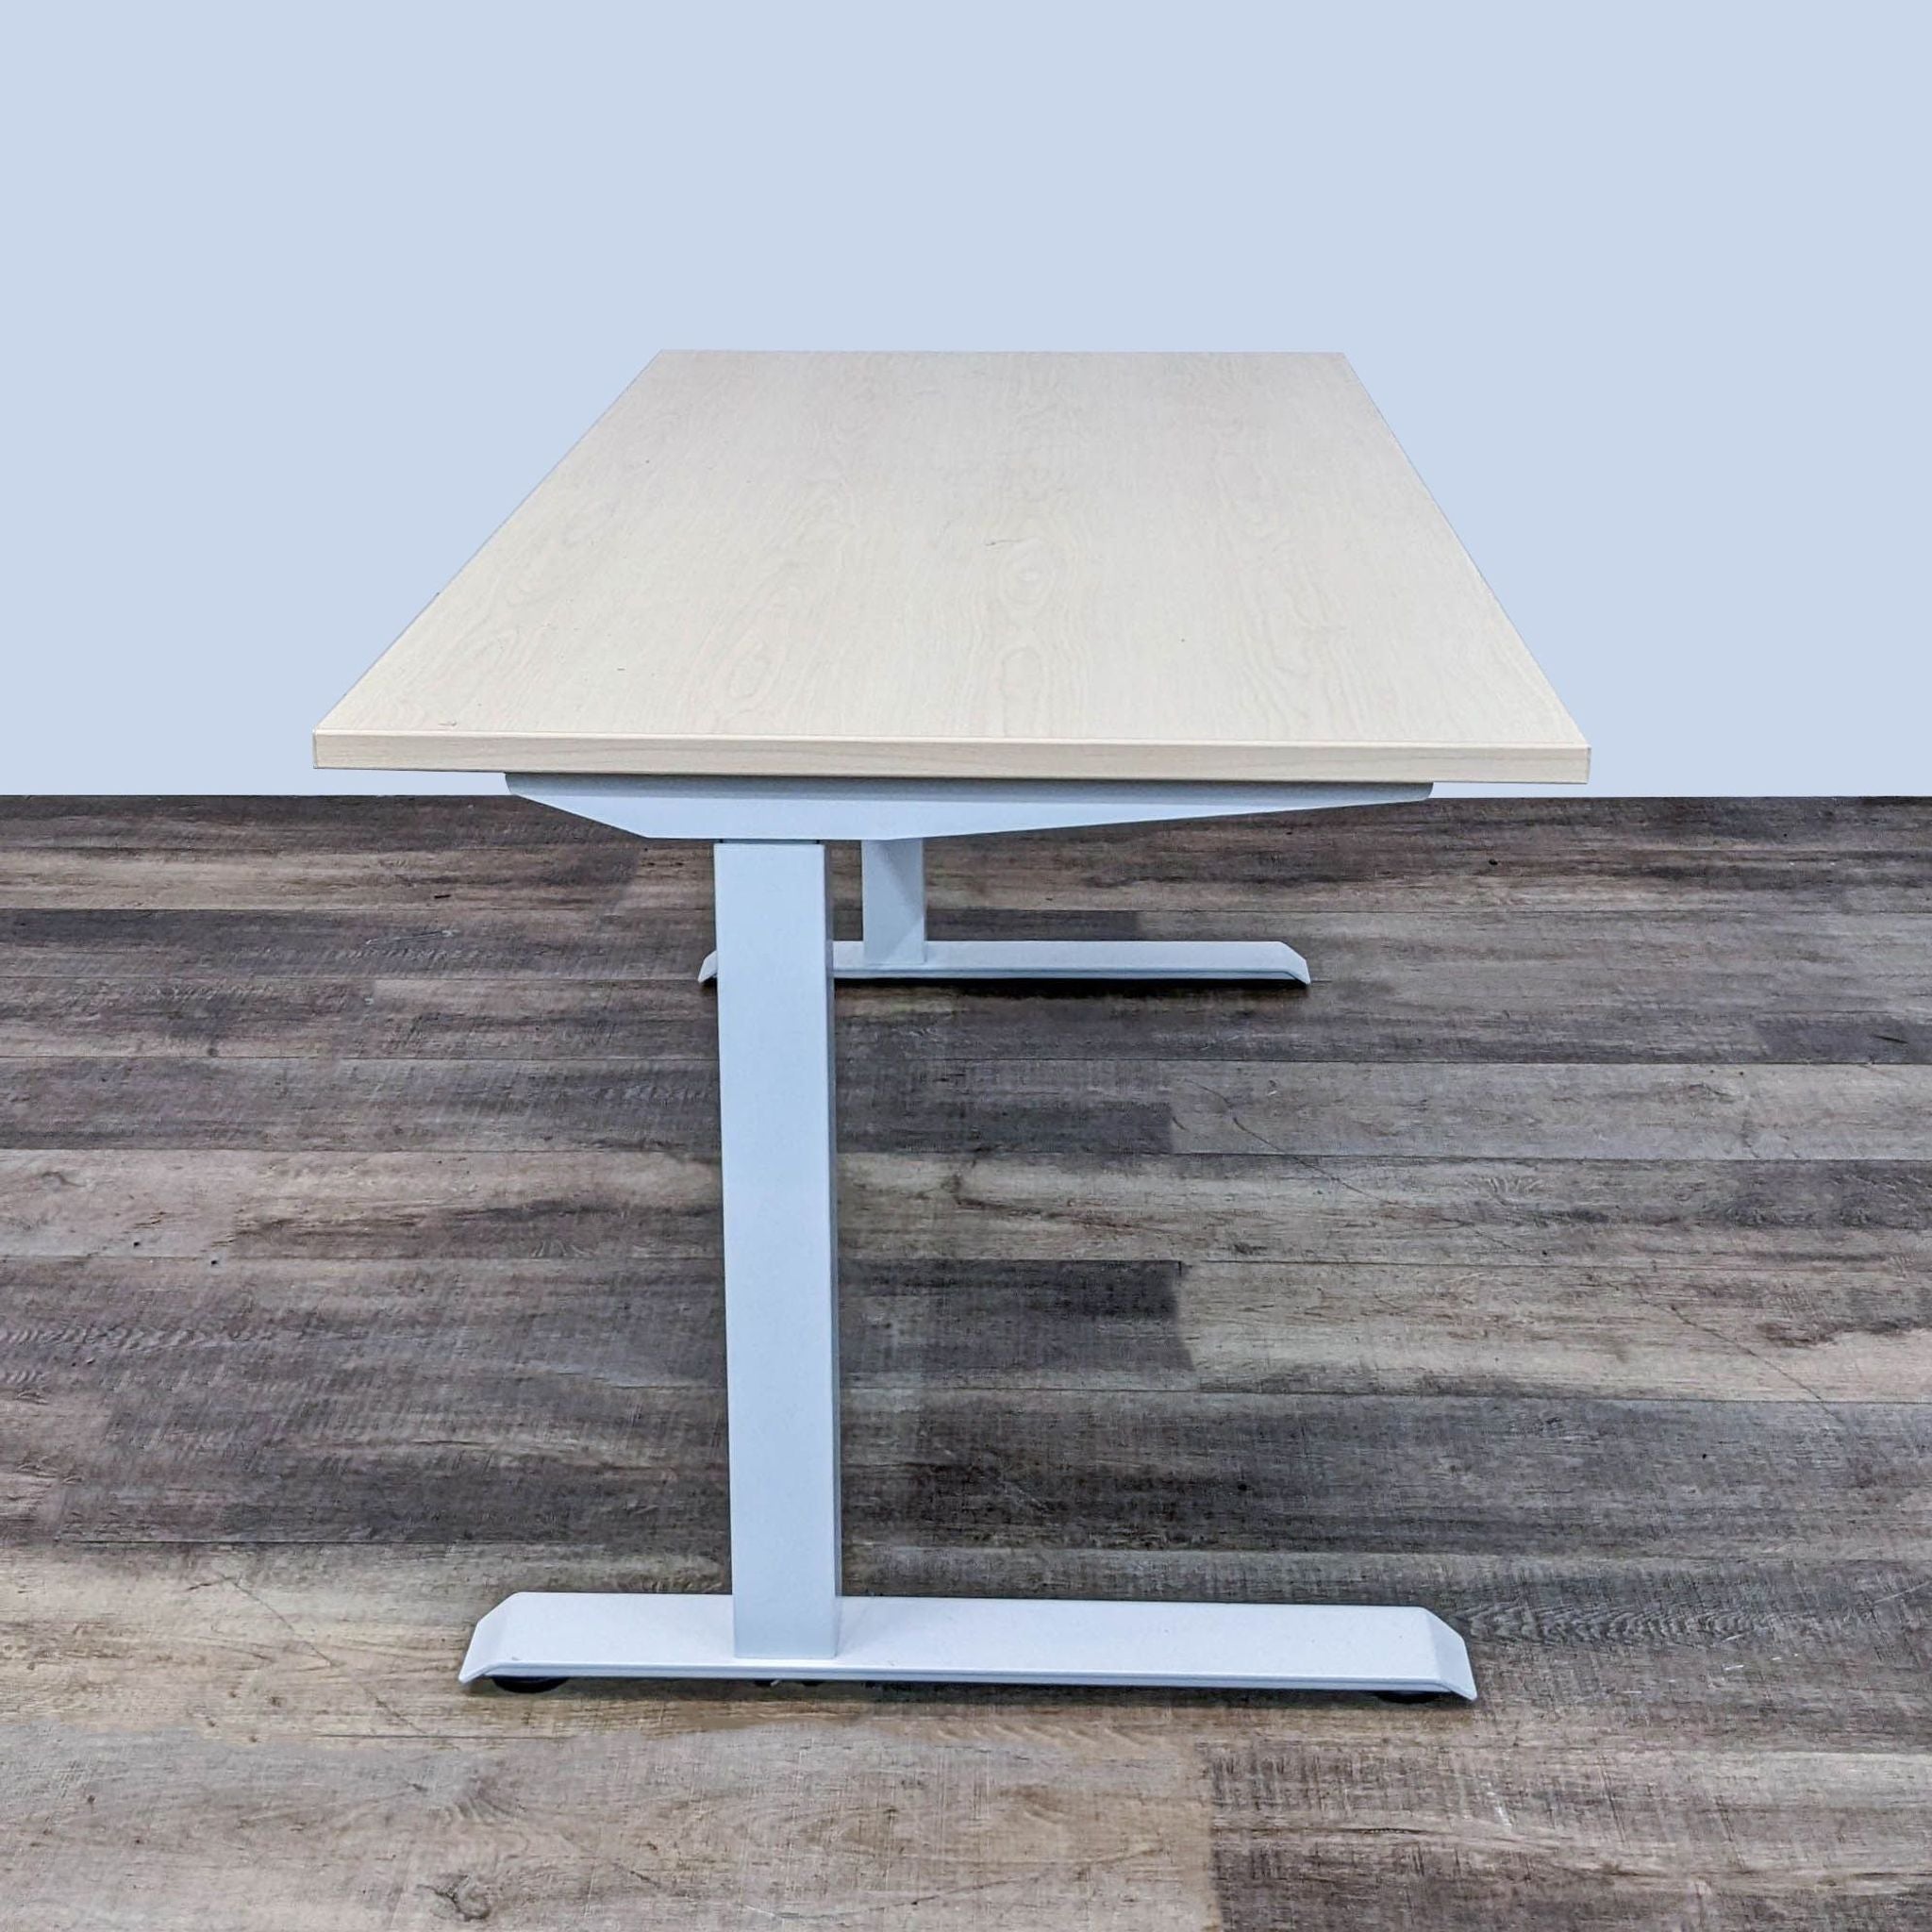 AMQ brand electric height-adjustable standing desk with oak finish tabletop and dual-motor lift system.